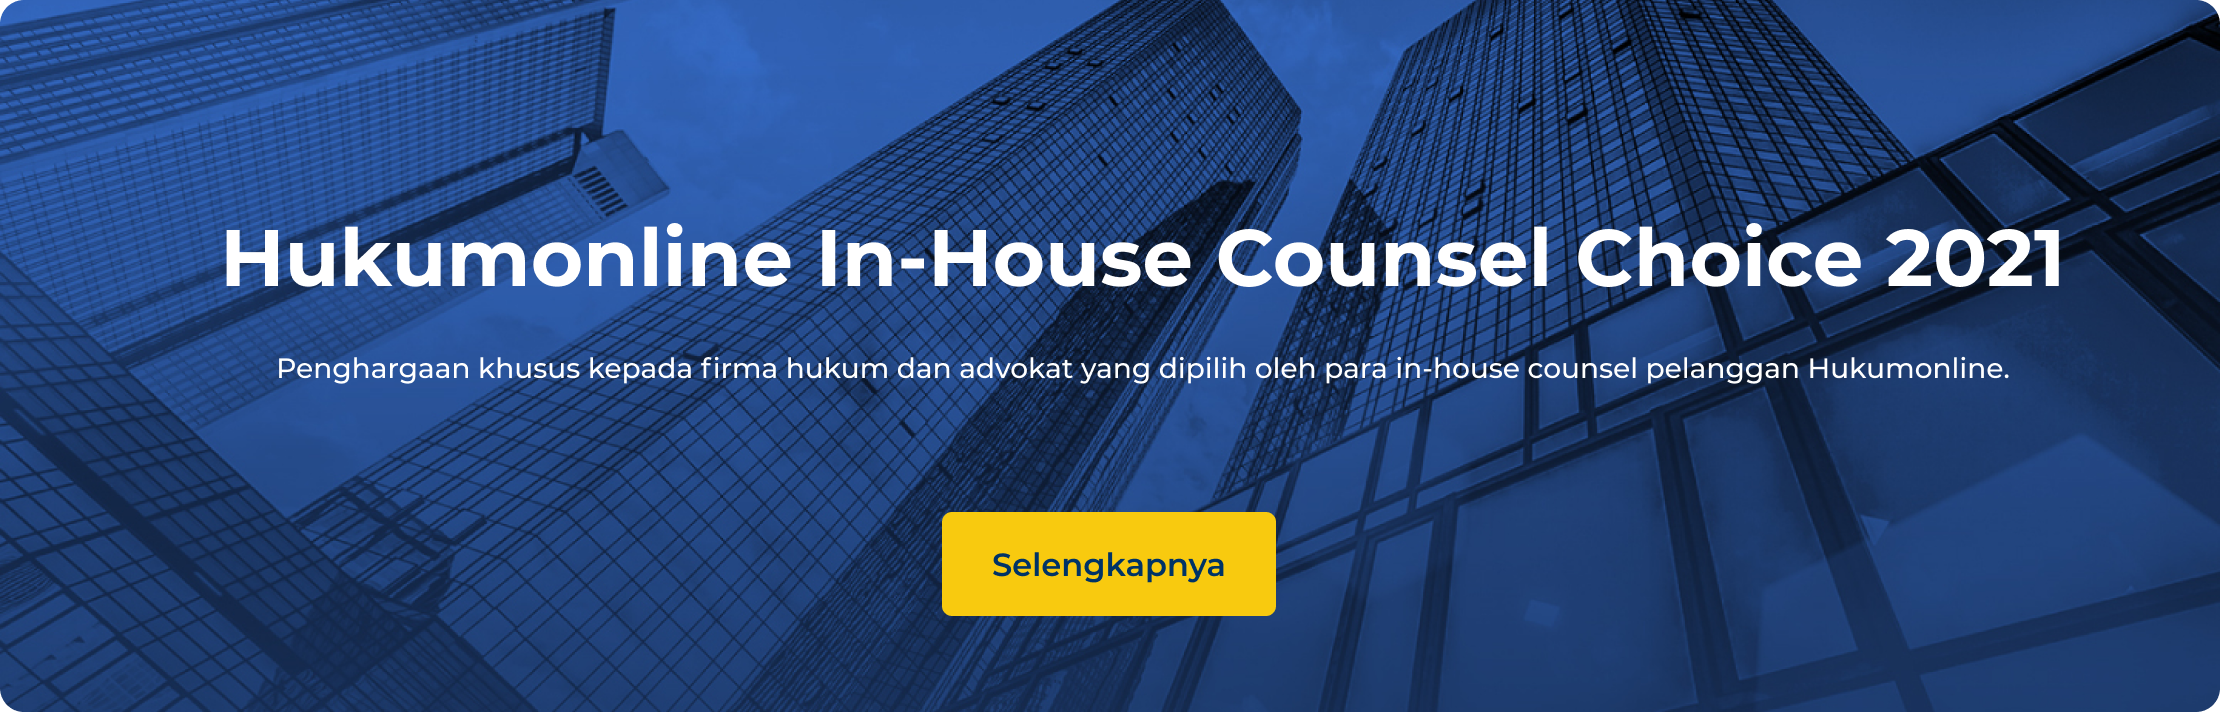 Homepage Rangking In-House Counsel 2021